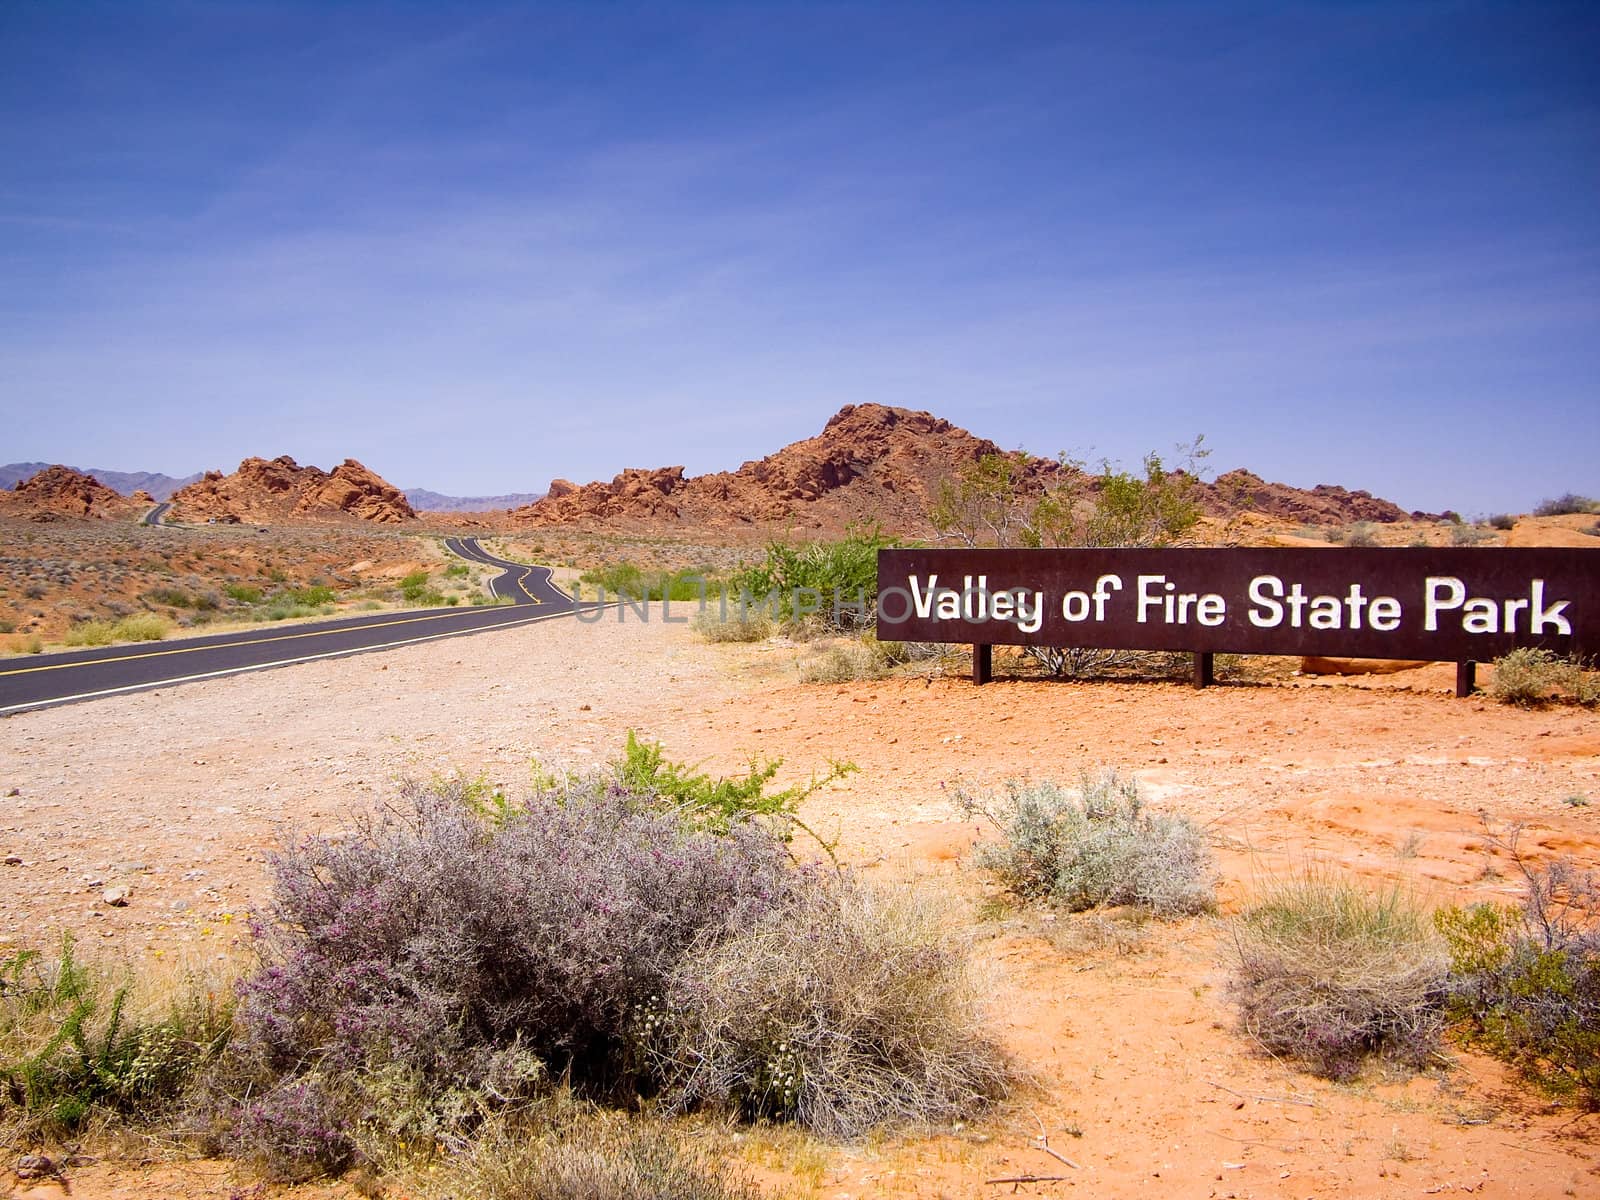 Entrance sign for Valley of Fire State Park Nevada USA